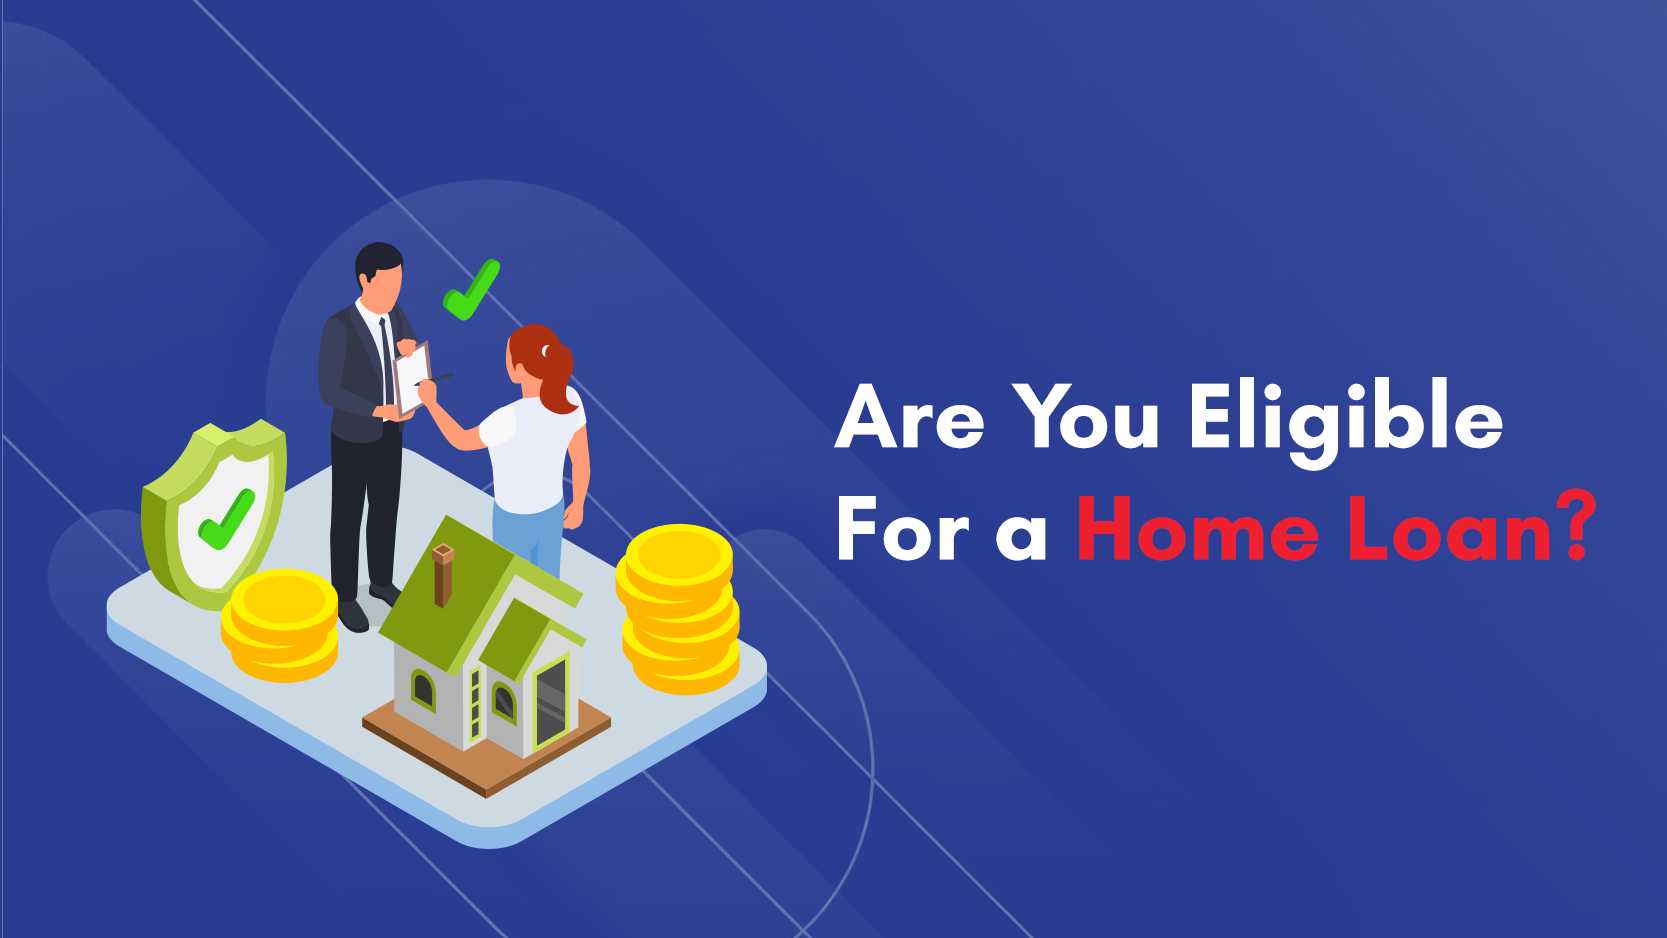 Are You Eligible For a Home Loan?